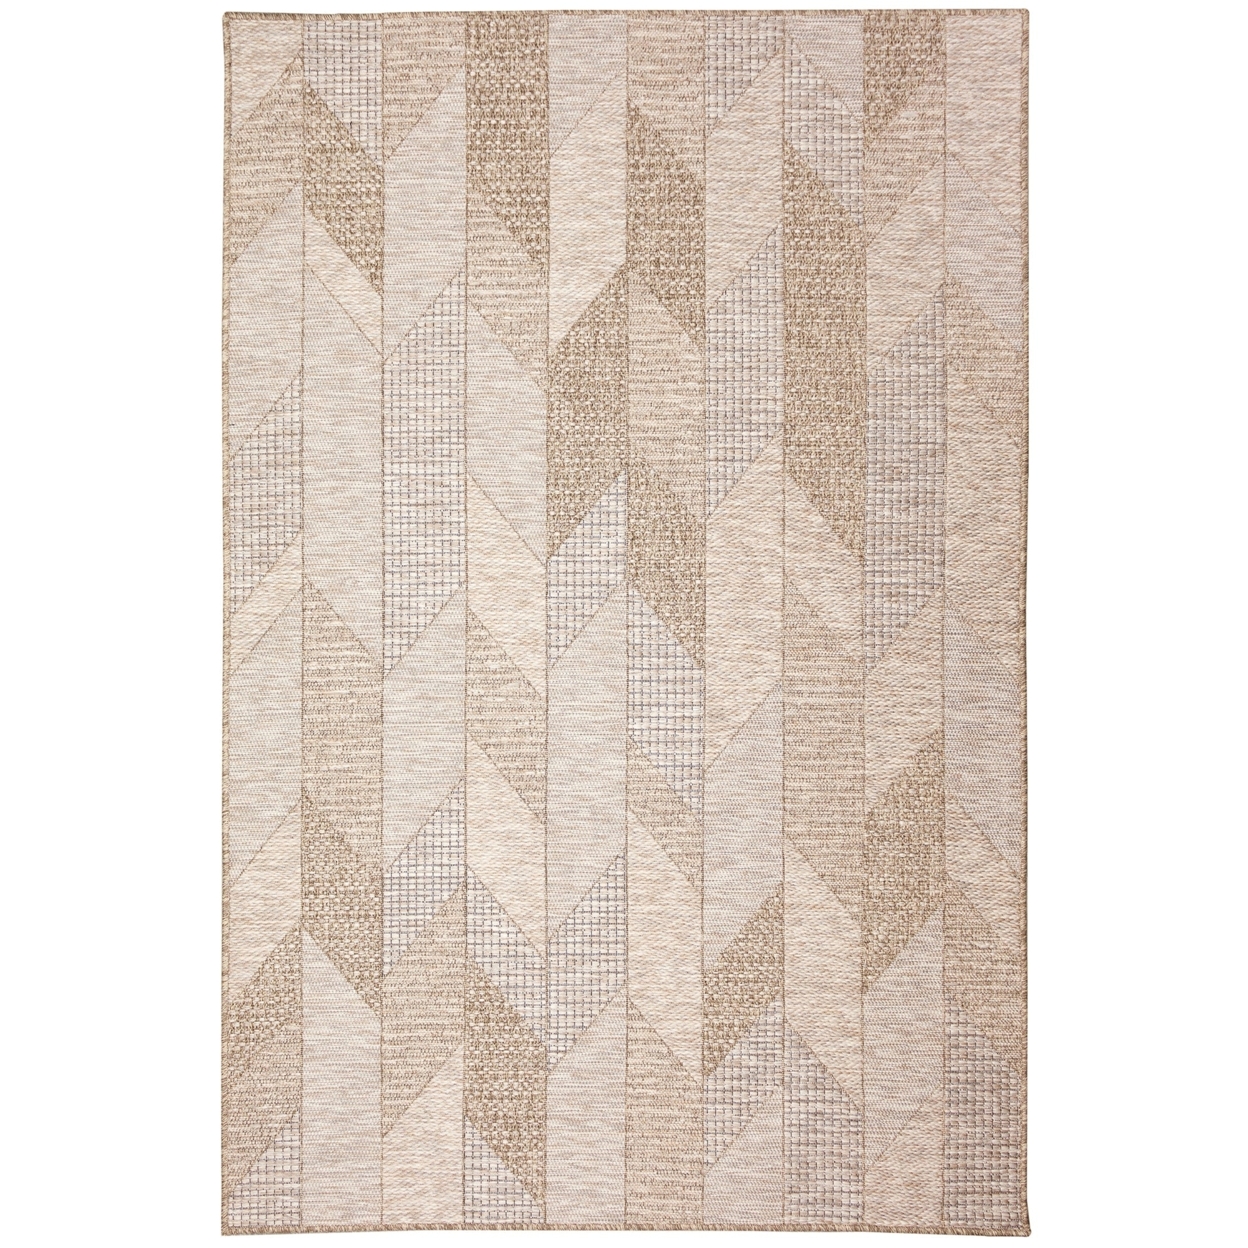 Liora Manne Orly Angles Indoor Outdoor Area Rug Natural - 1'11 X 7'6